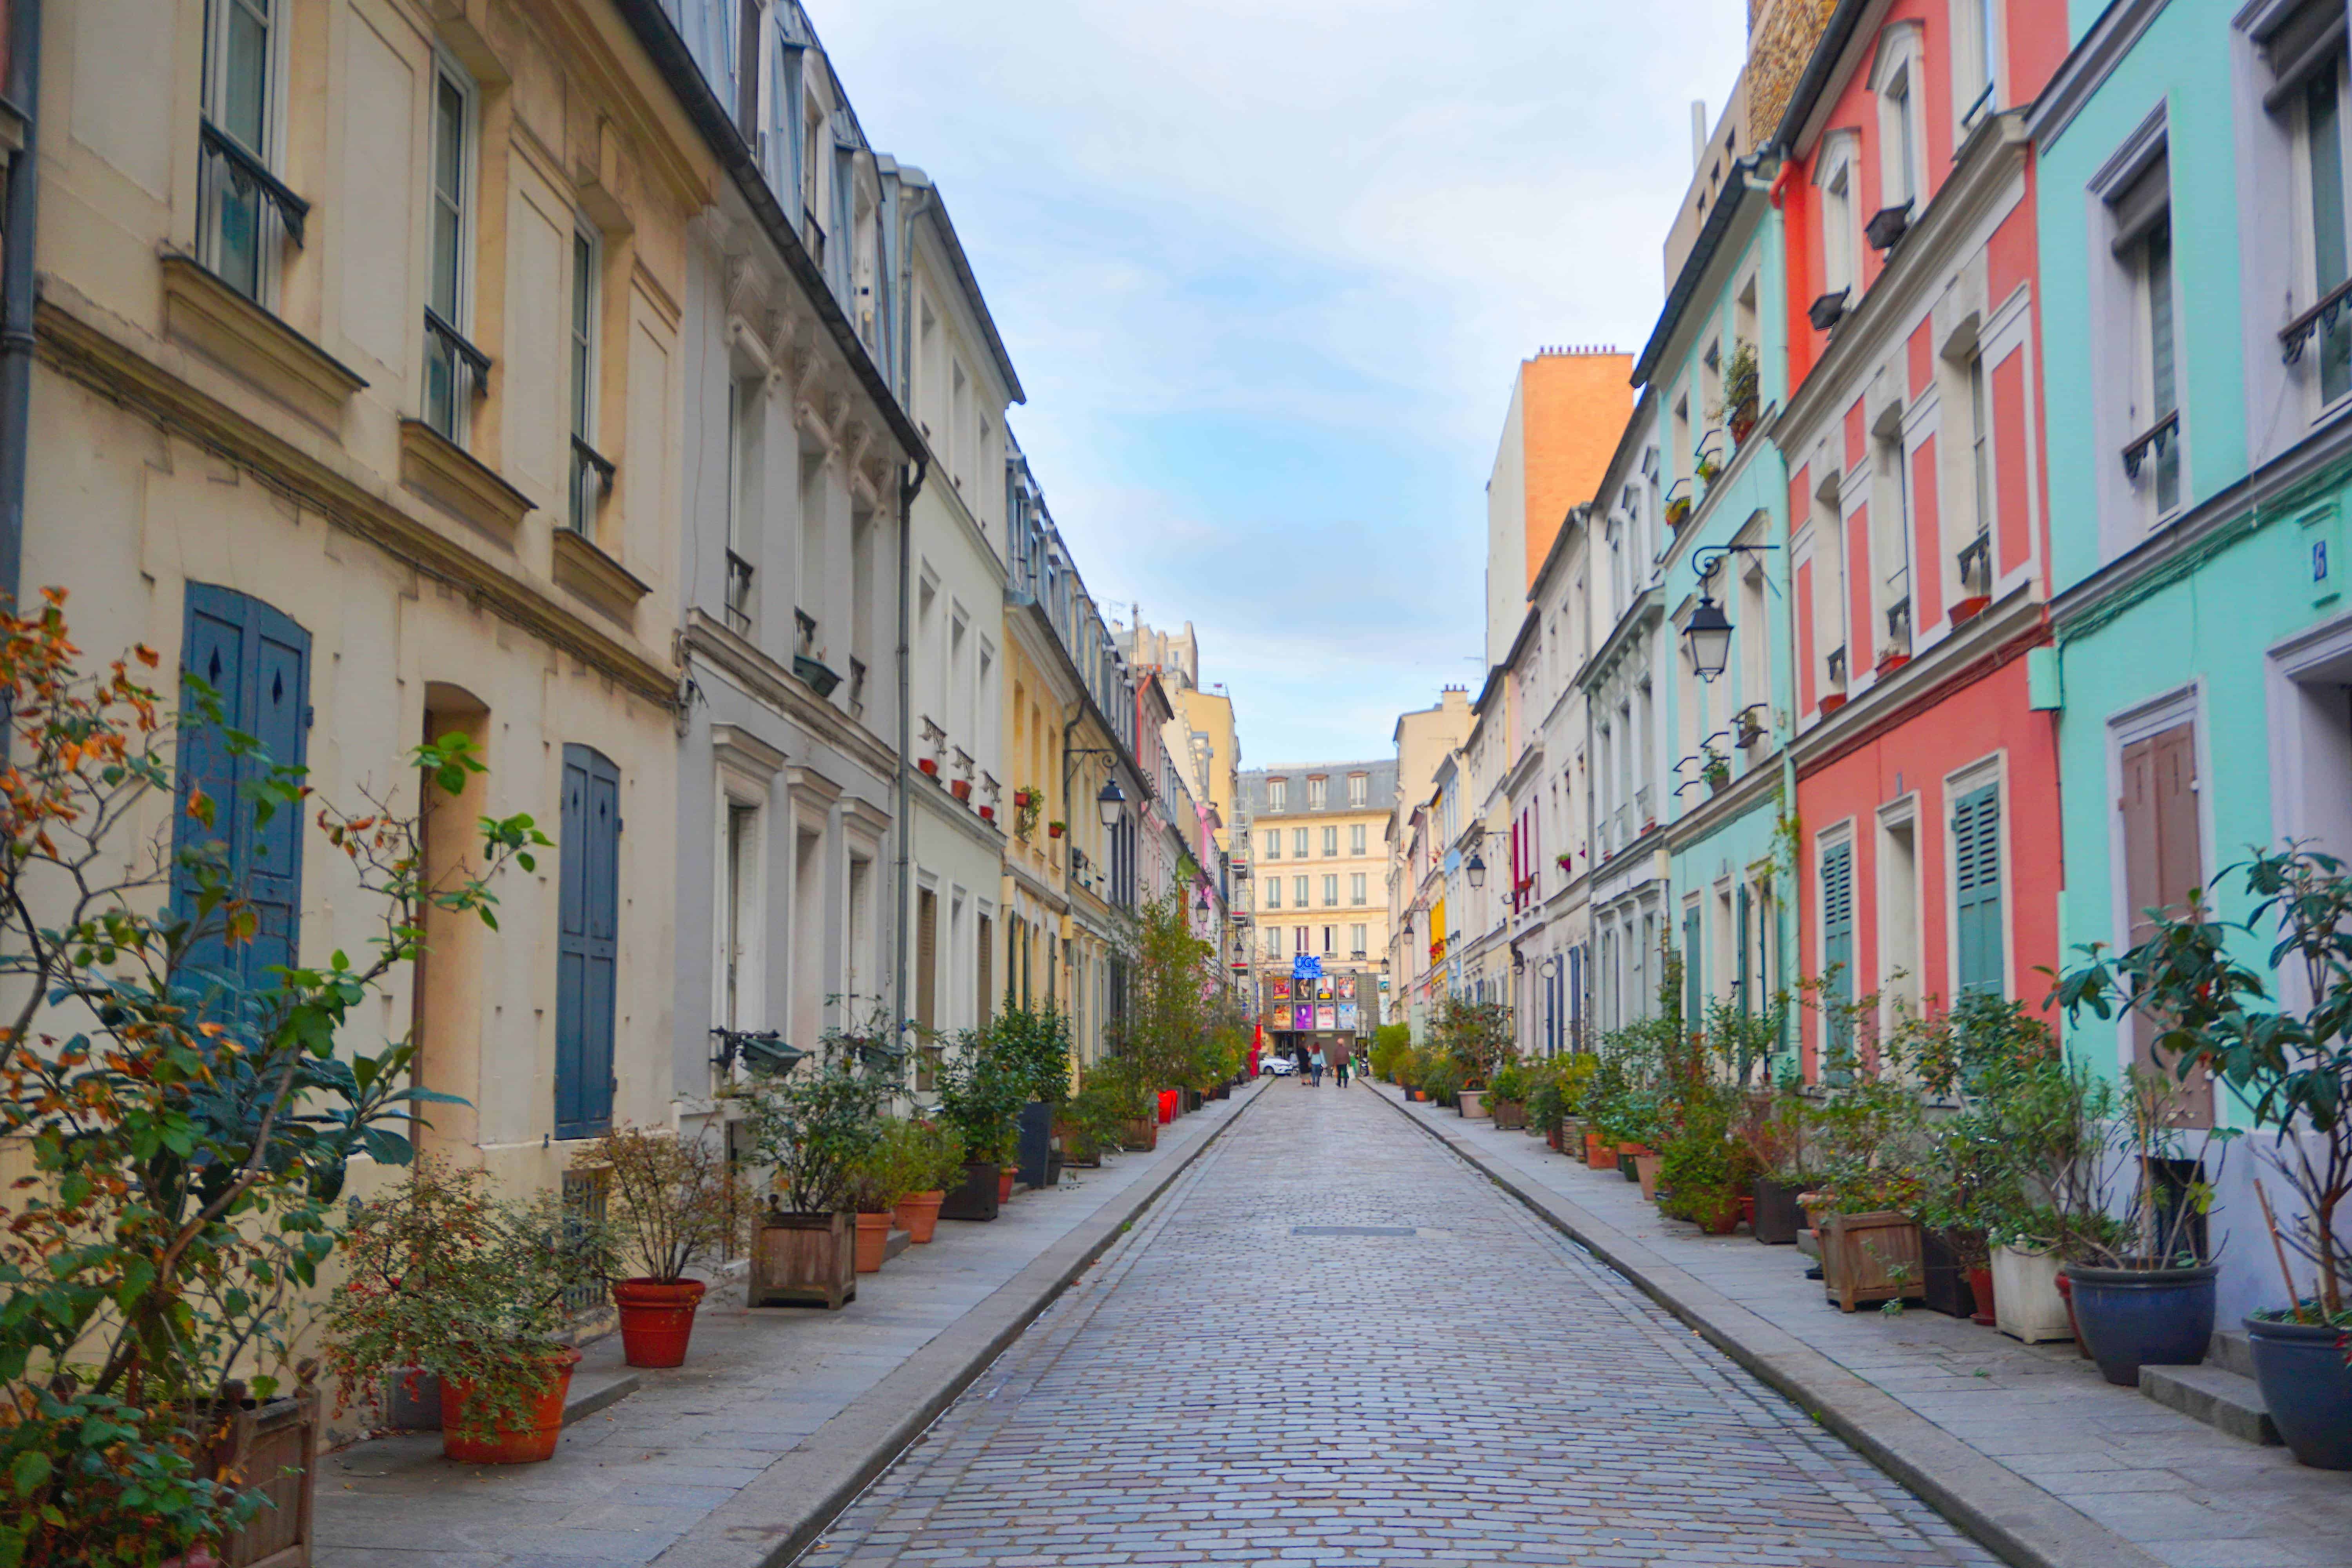 Rue Cremuix is one of the most colorful streets in Paris | best paris photography spots 